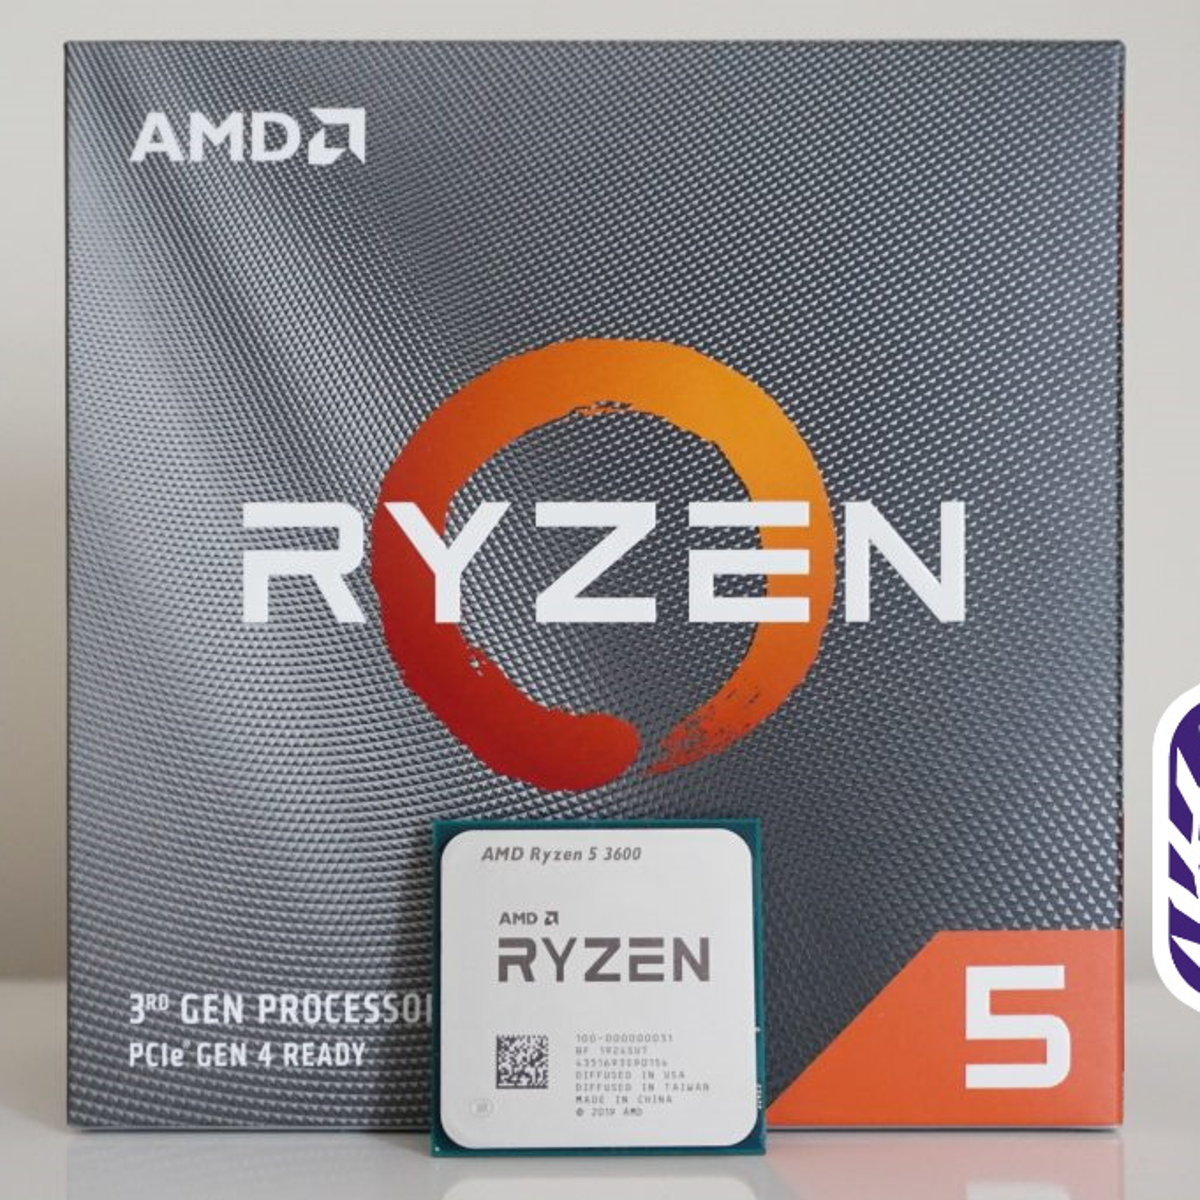 Dronning Indica underholdning AMD Ryzen 5 3600 review: A great value gaming CPU | Rock Paper Shotgun